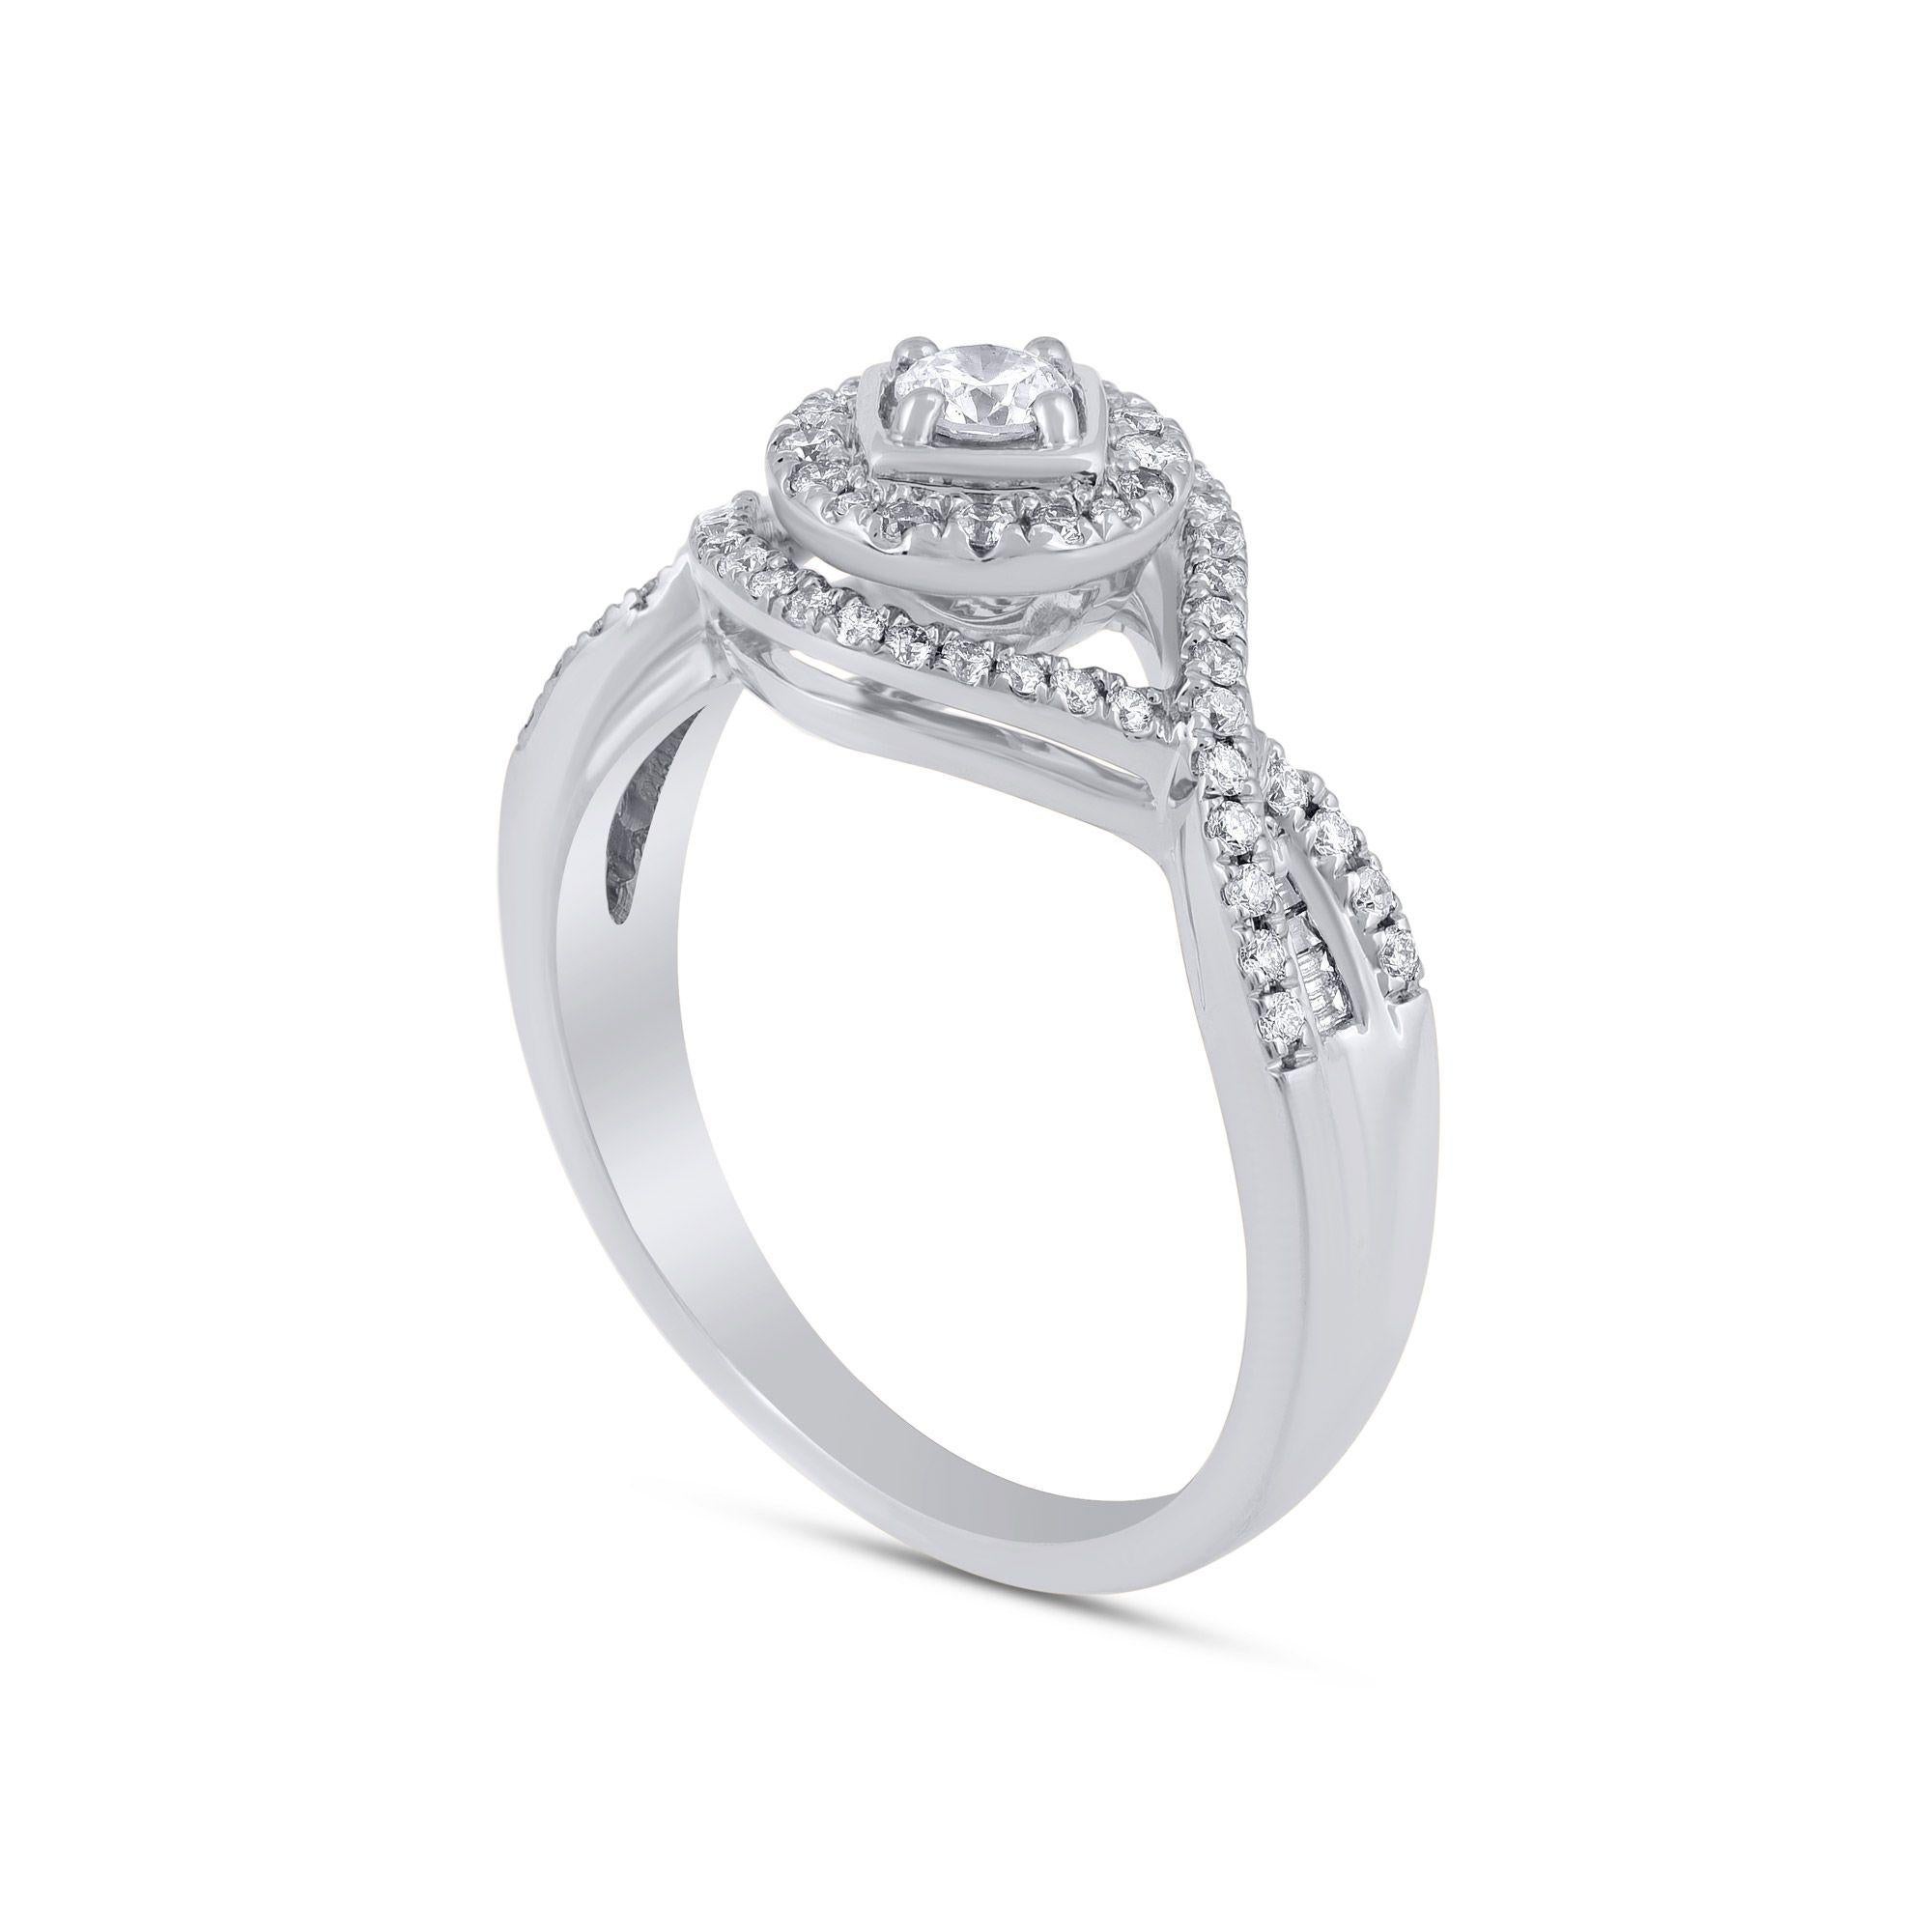 A unique designer Engagement Ring studded with 71 diamonds in prong, micropave and channel setting. Crafted in 14KT gold and diamonds are graded I-J Color, I1-I2 Clarity. 
